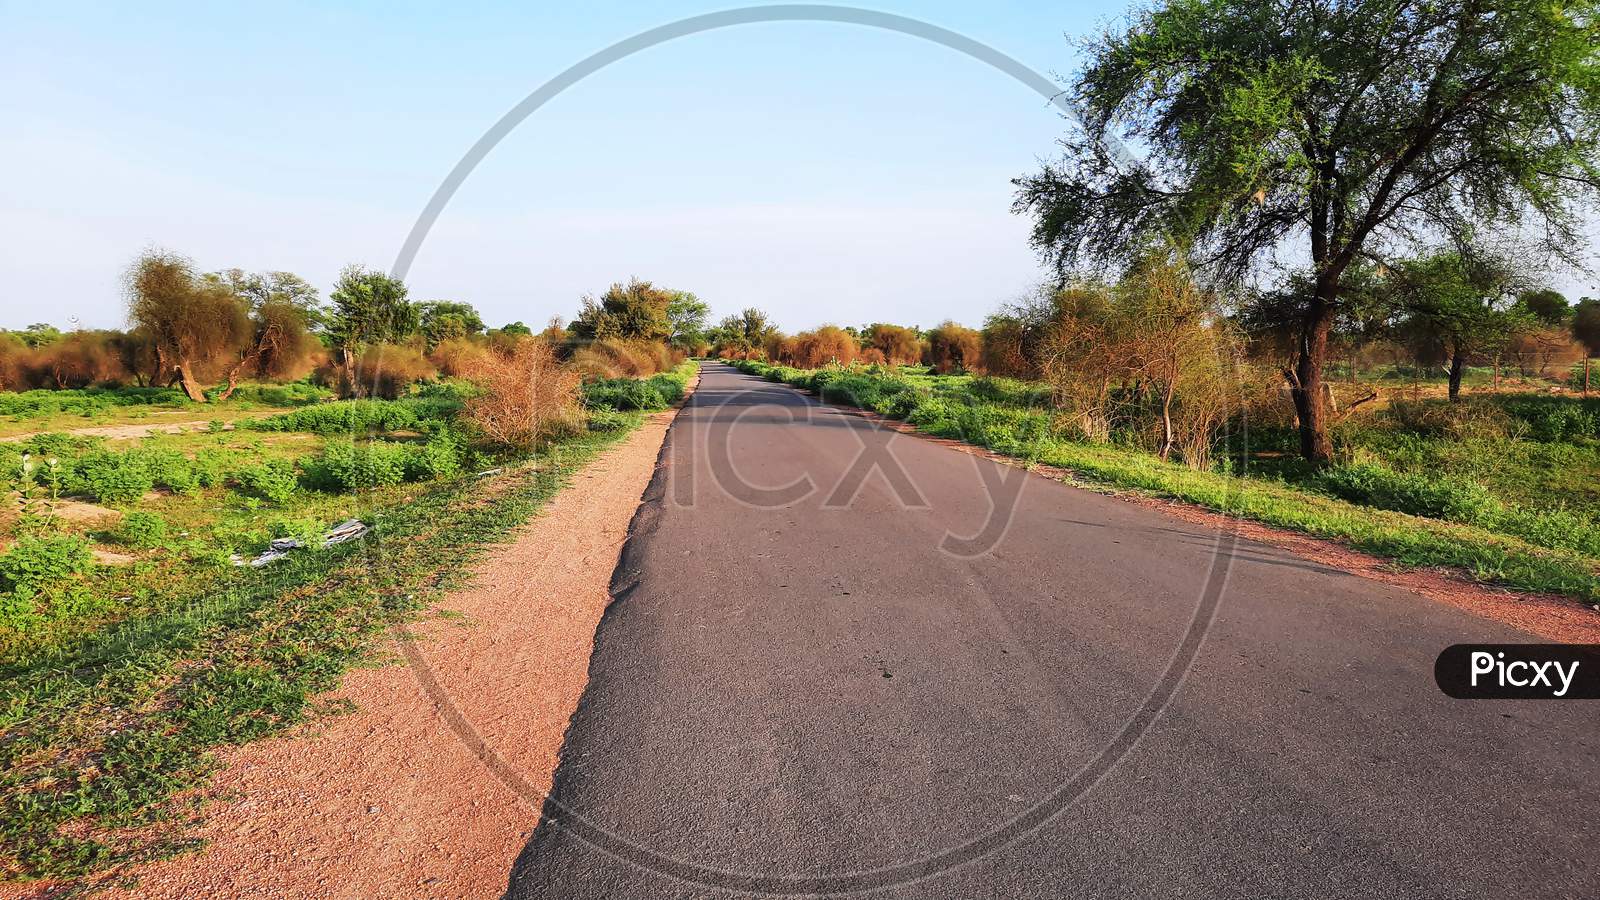 Asphalt Road In Rural Area Of India With Grunge On Edges